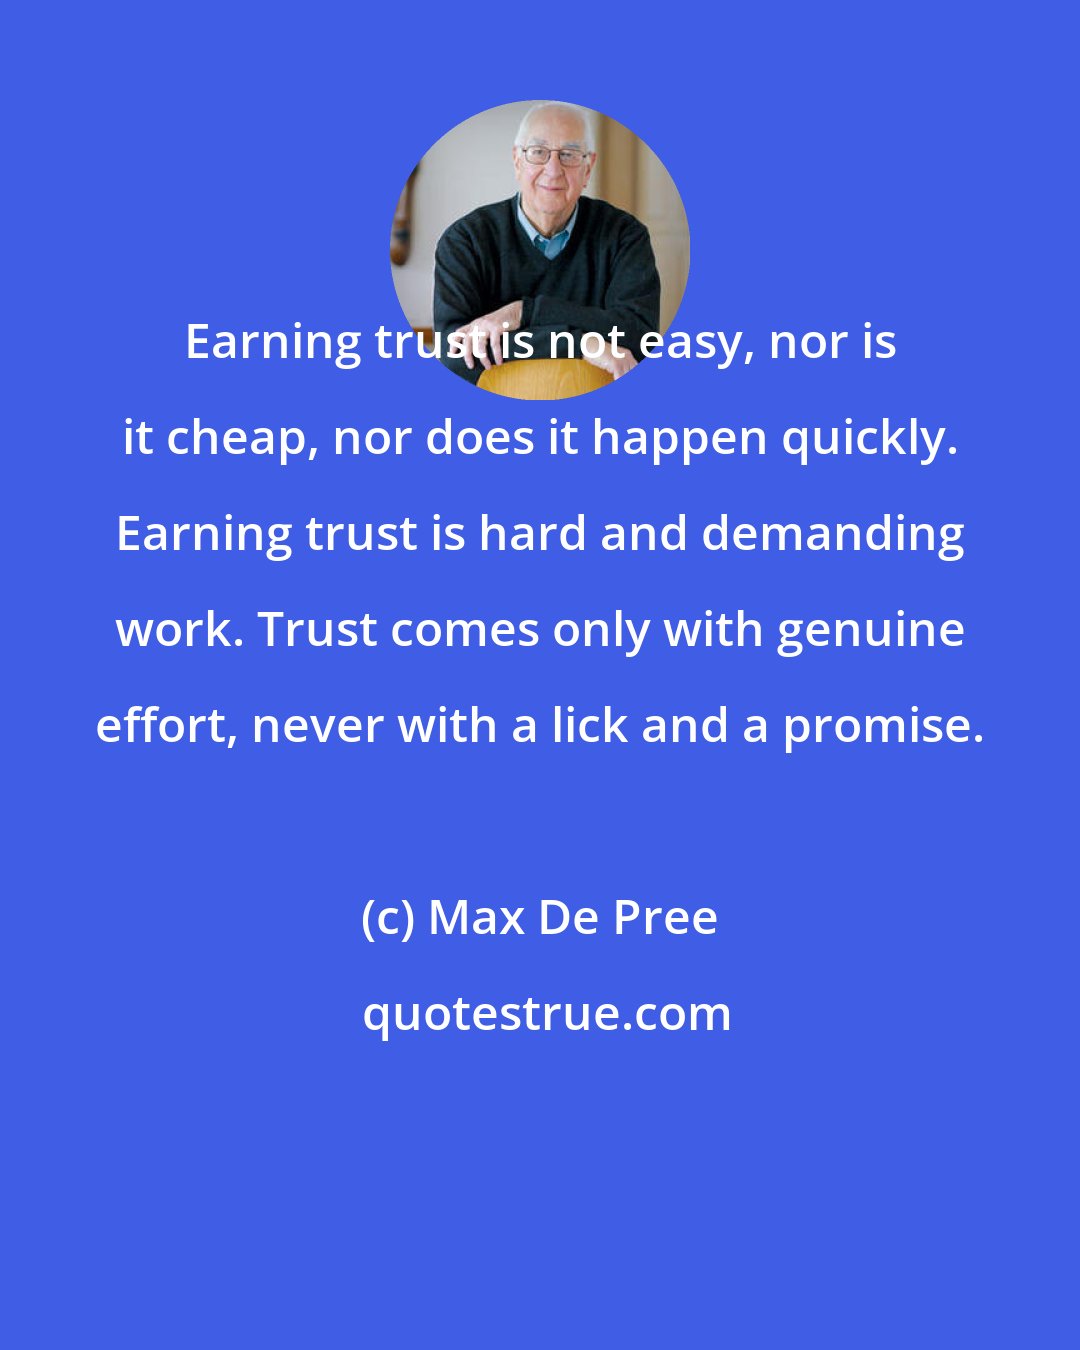 Max De Pree: Earning trust is not easy, nor is it cheap, nor does it happen quickly. Earning trust is hard and demanding work. Trust comes only with genuine effort, never with a lick and a promise.